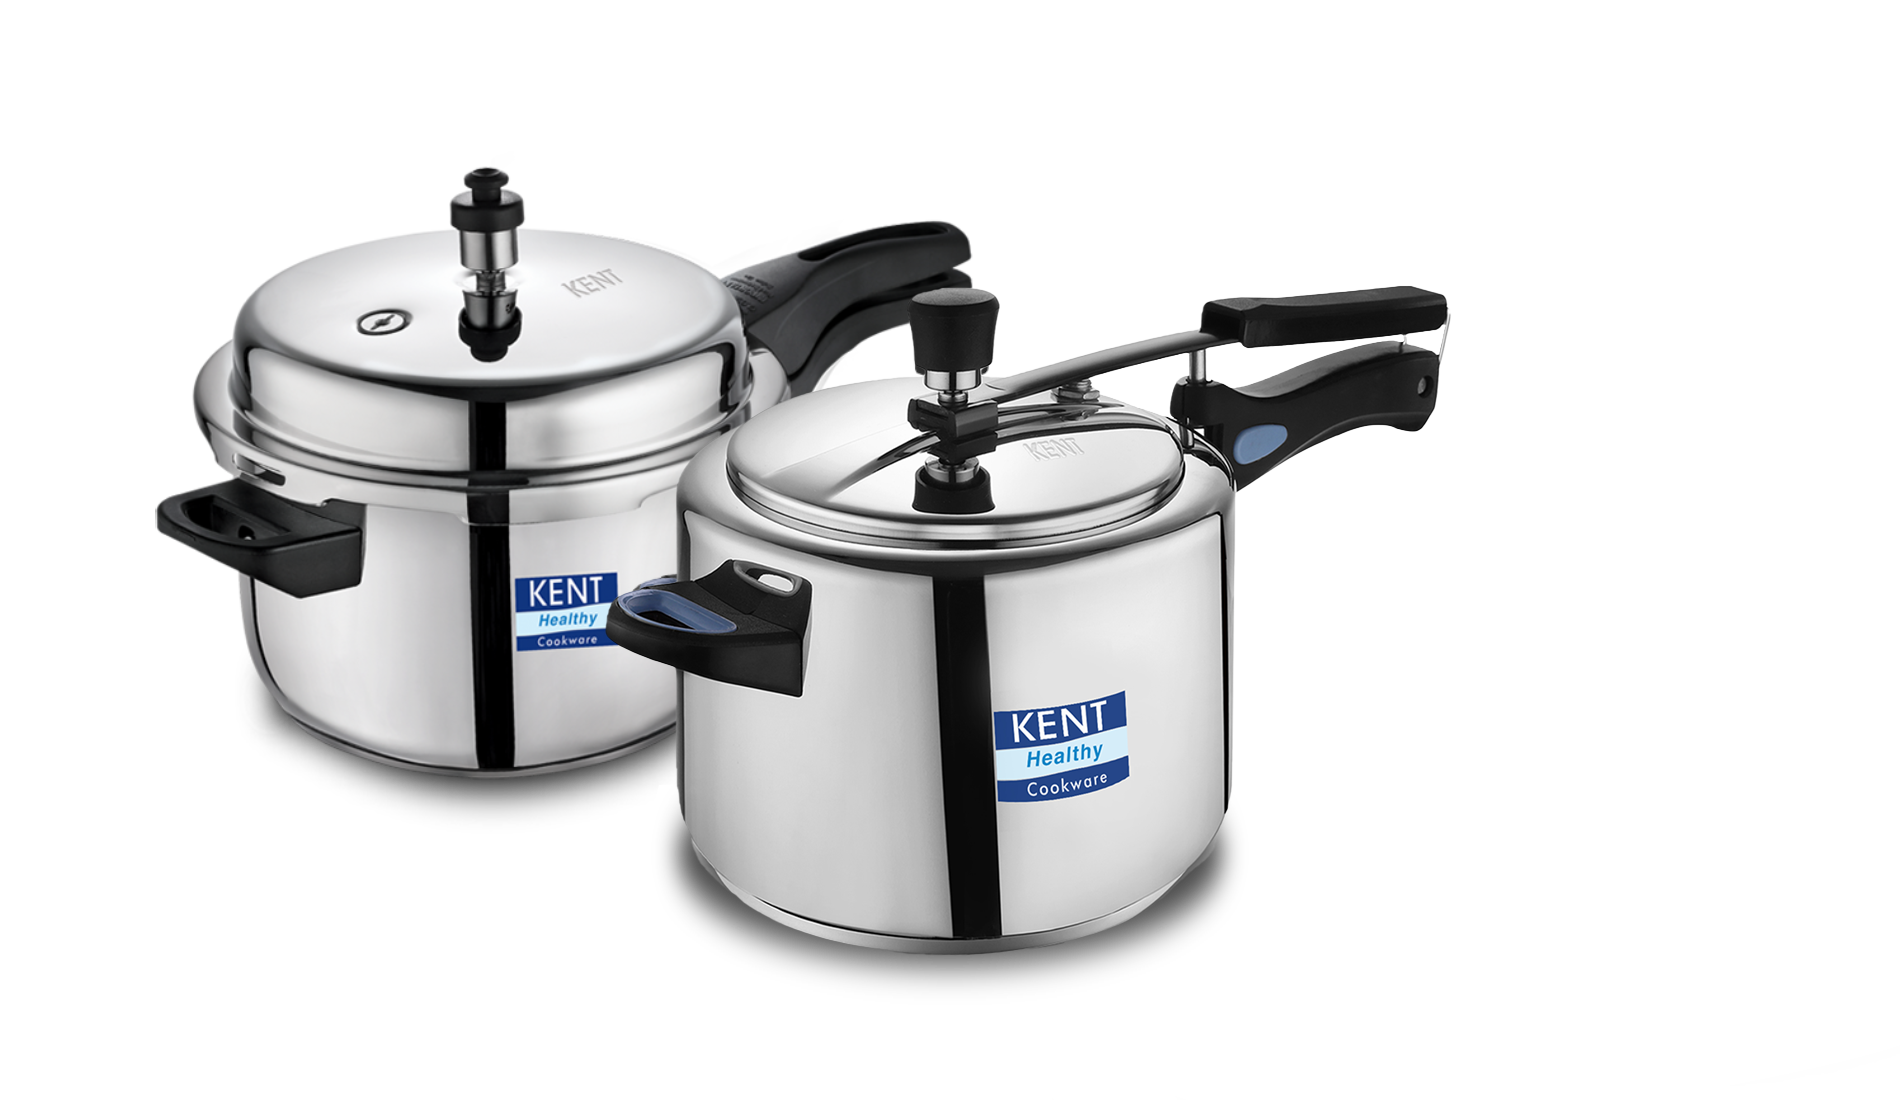 Extra Large Pressure Cooker Thick Commercial Stainless Steel